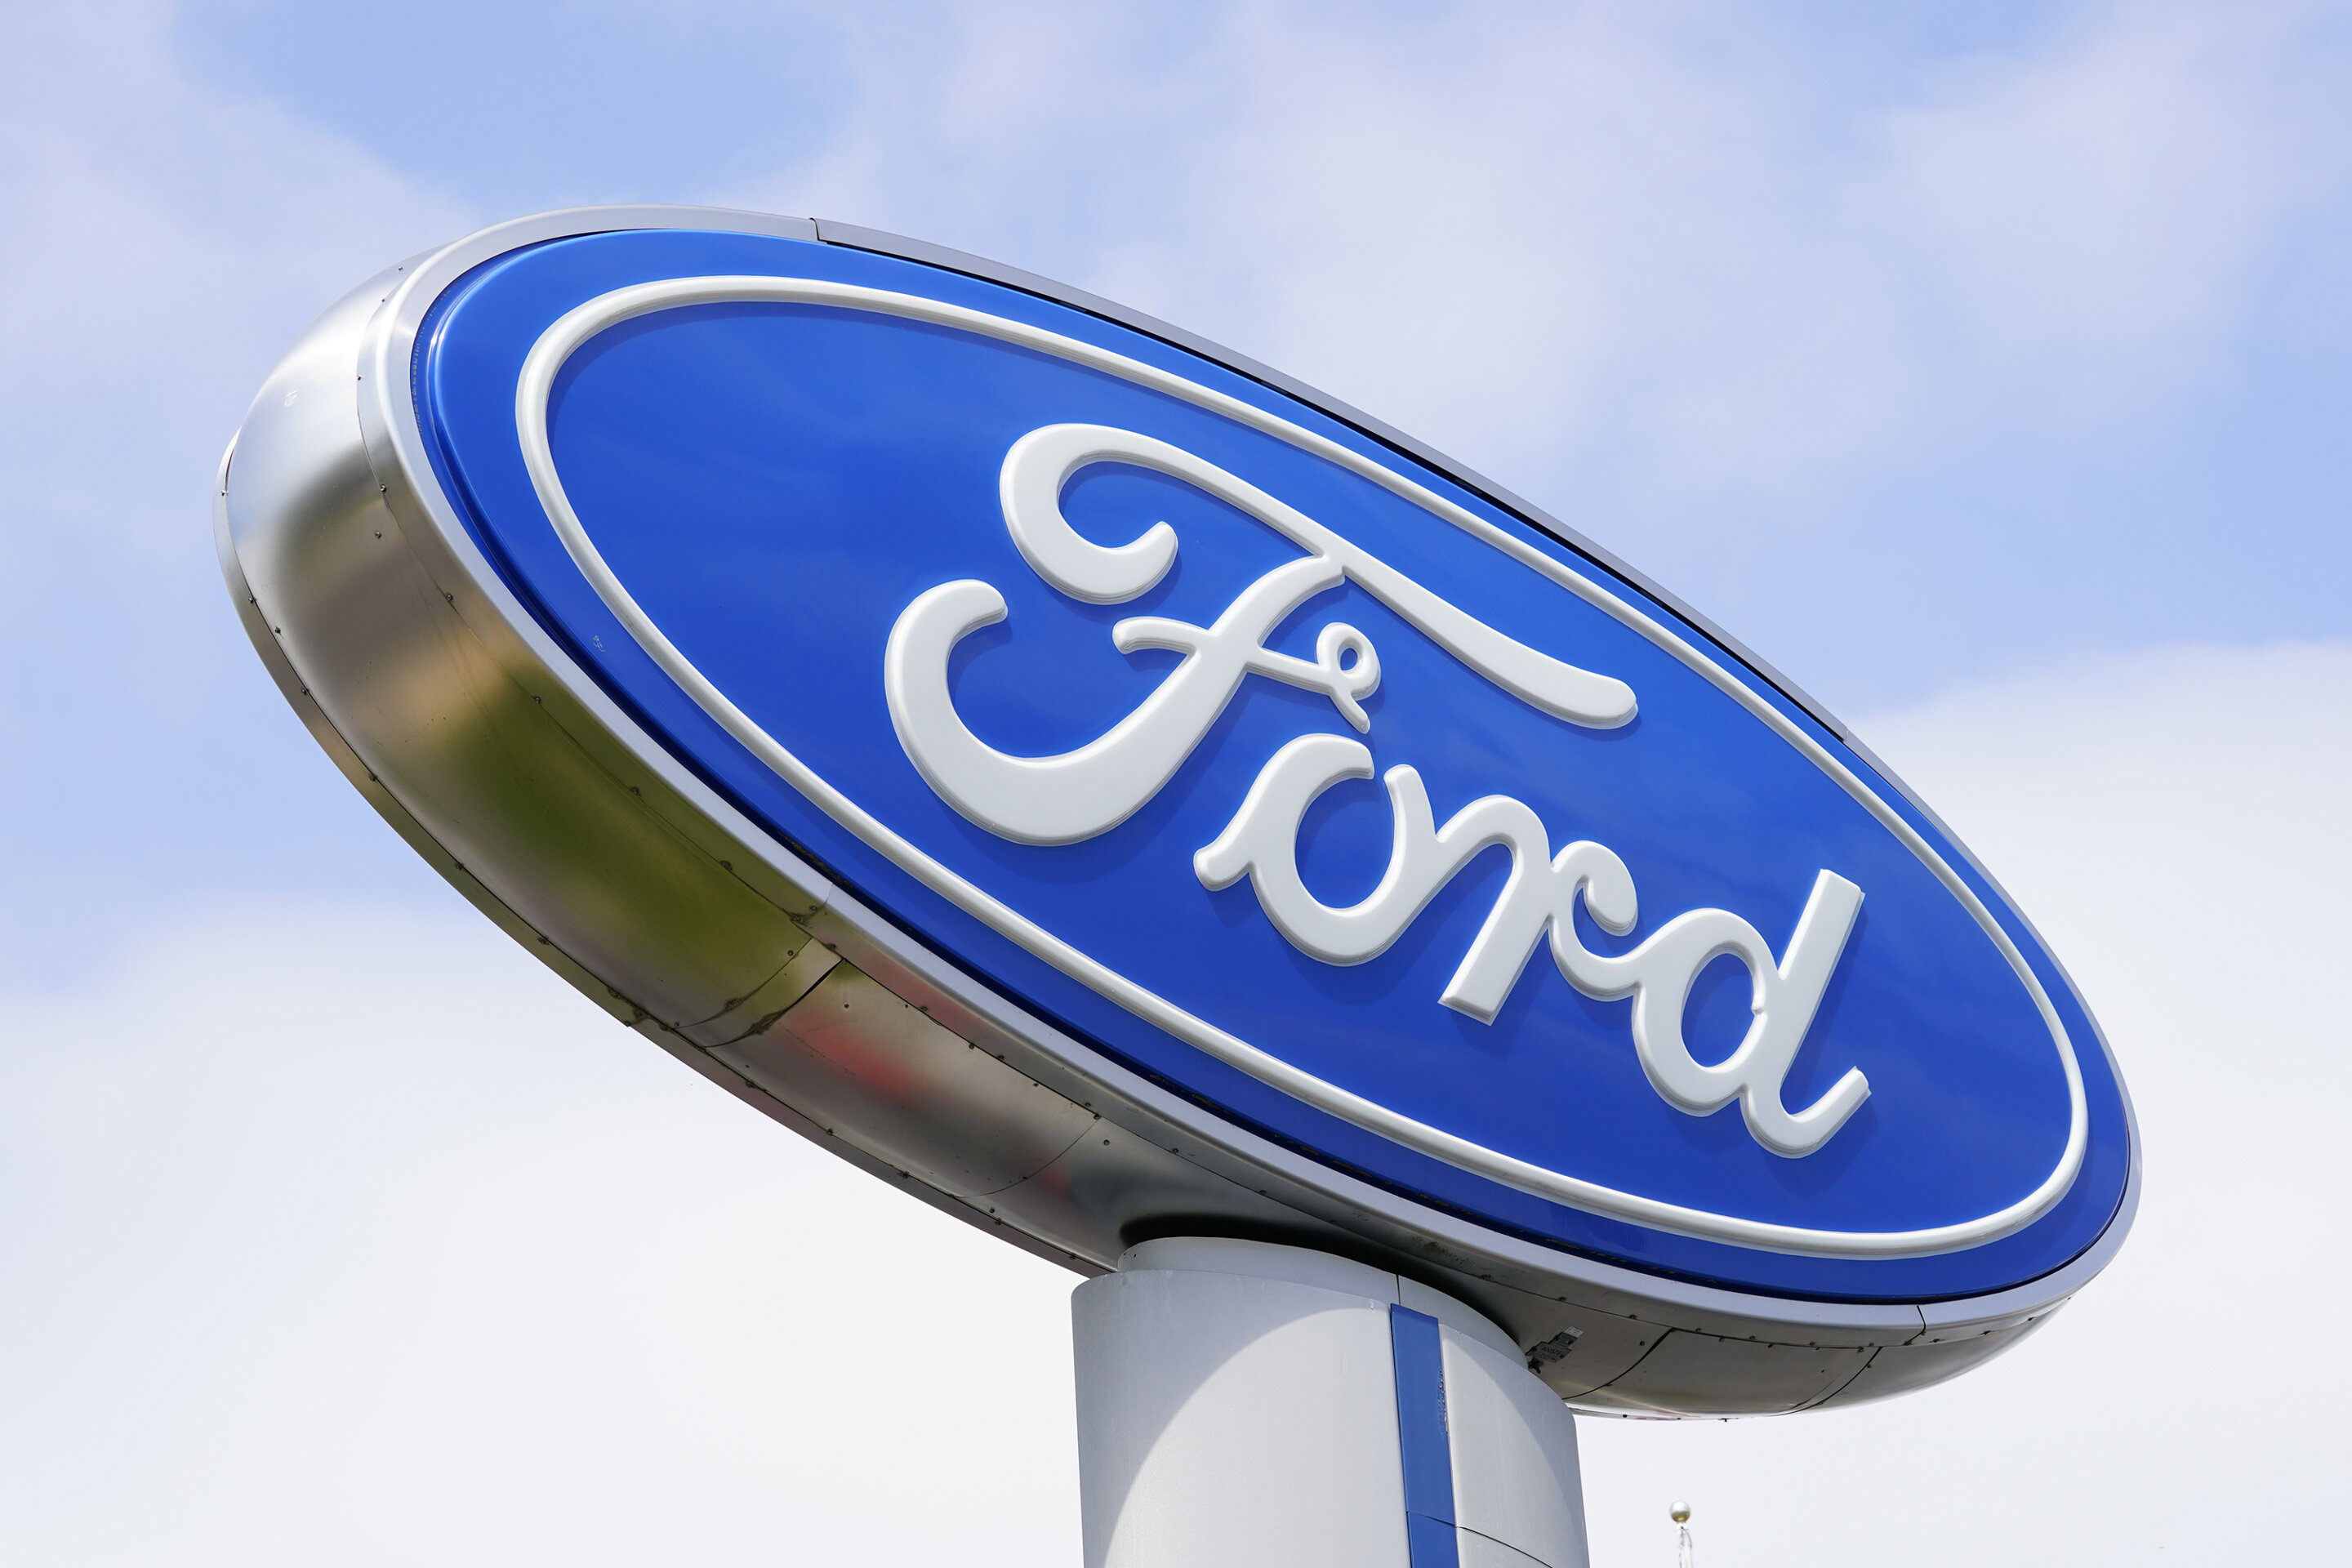 #Ford to raise production as US auto sales start to recover